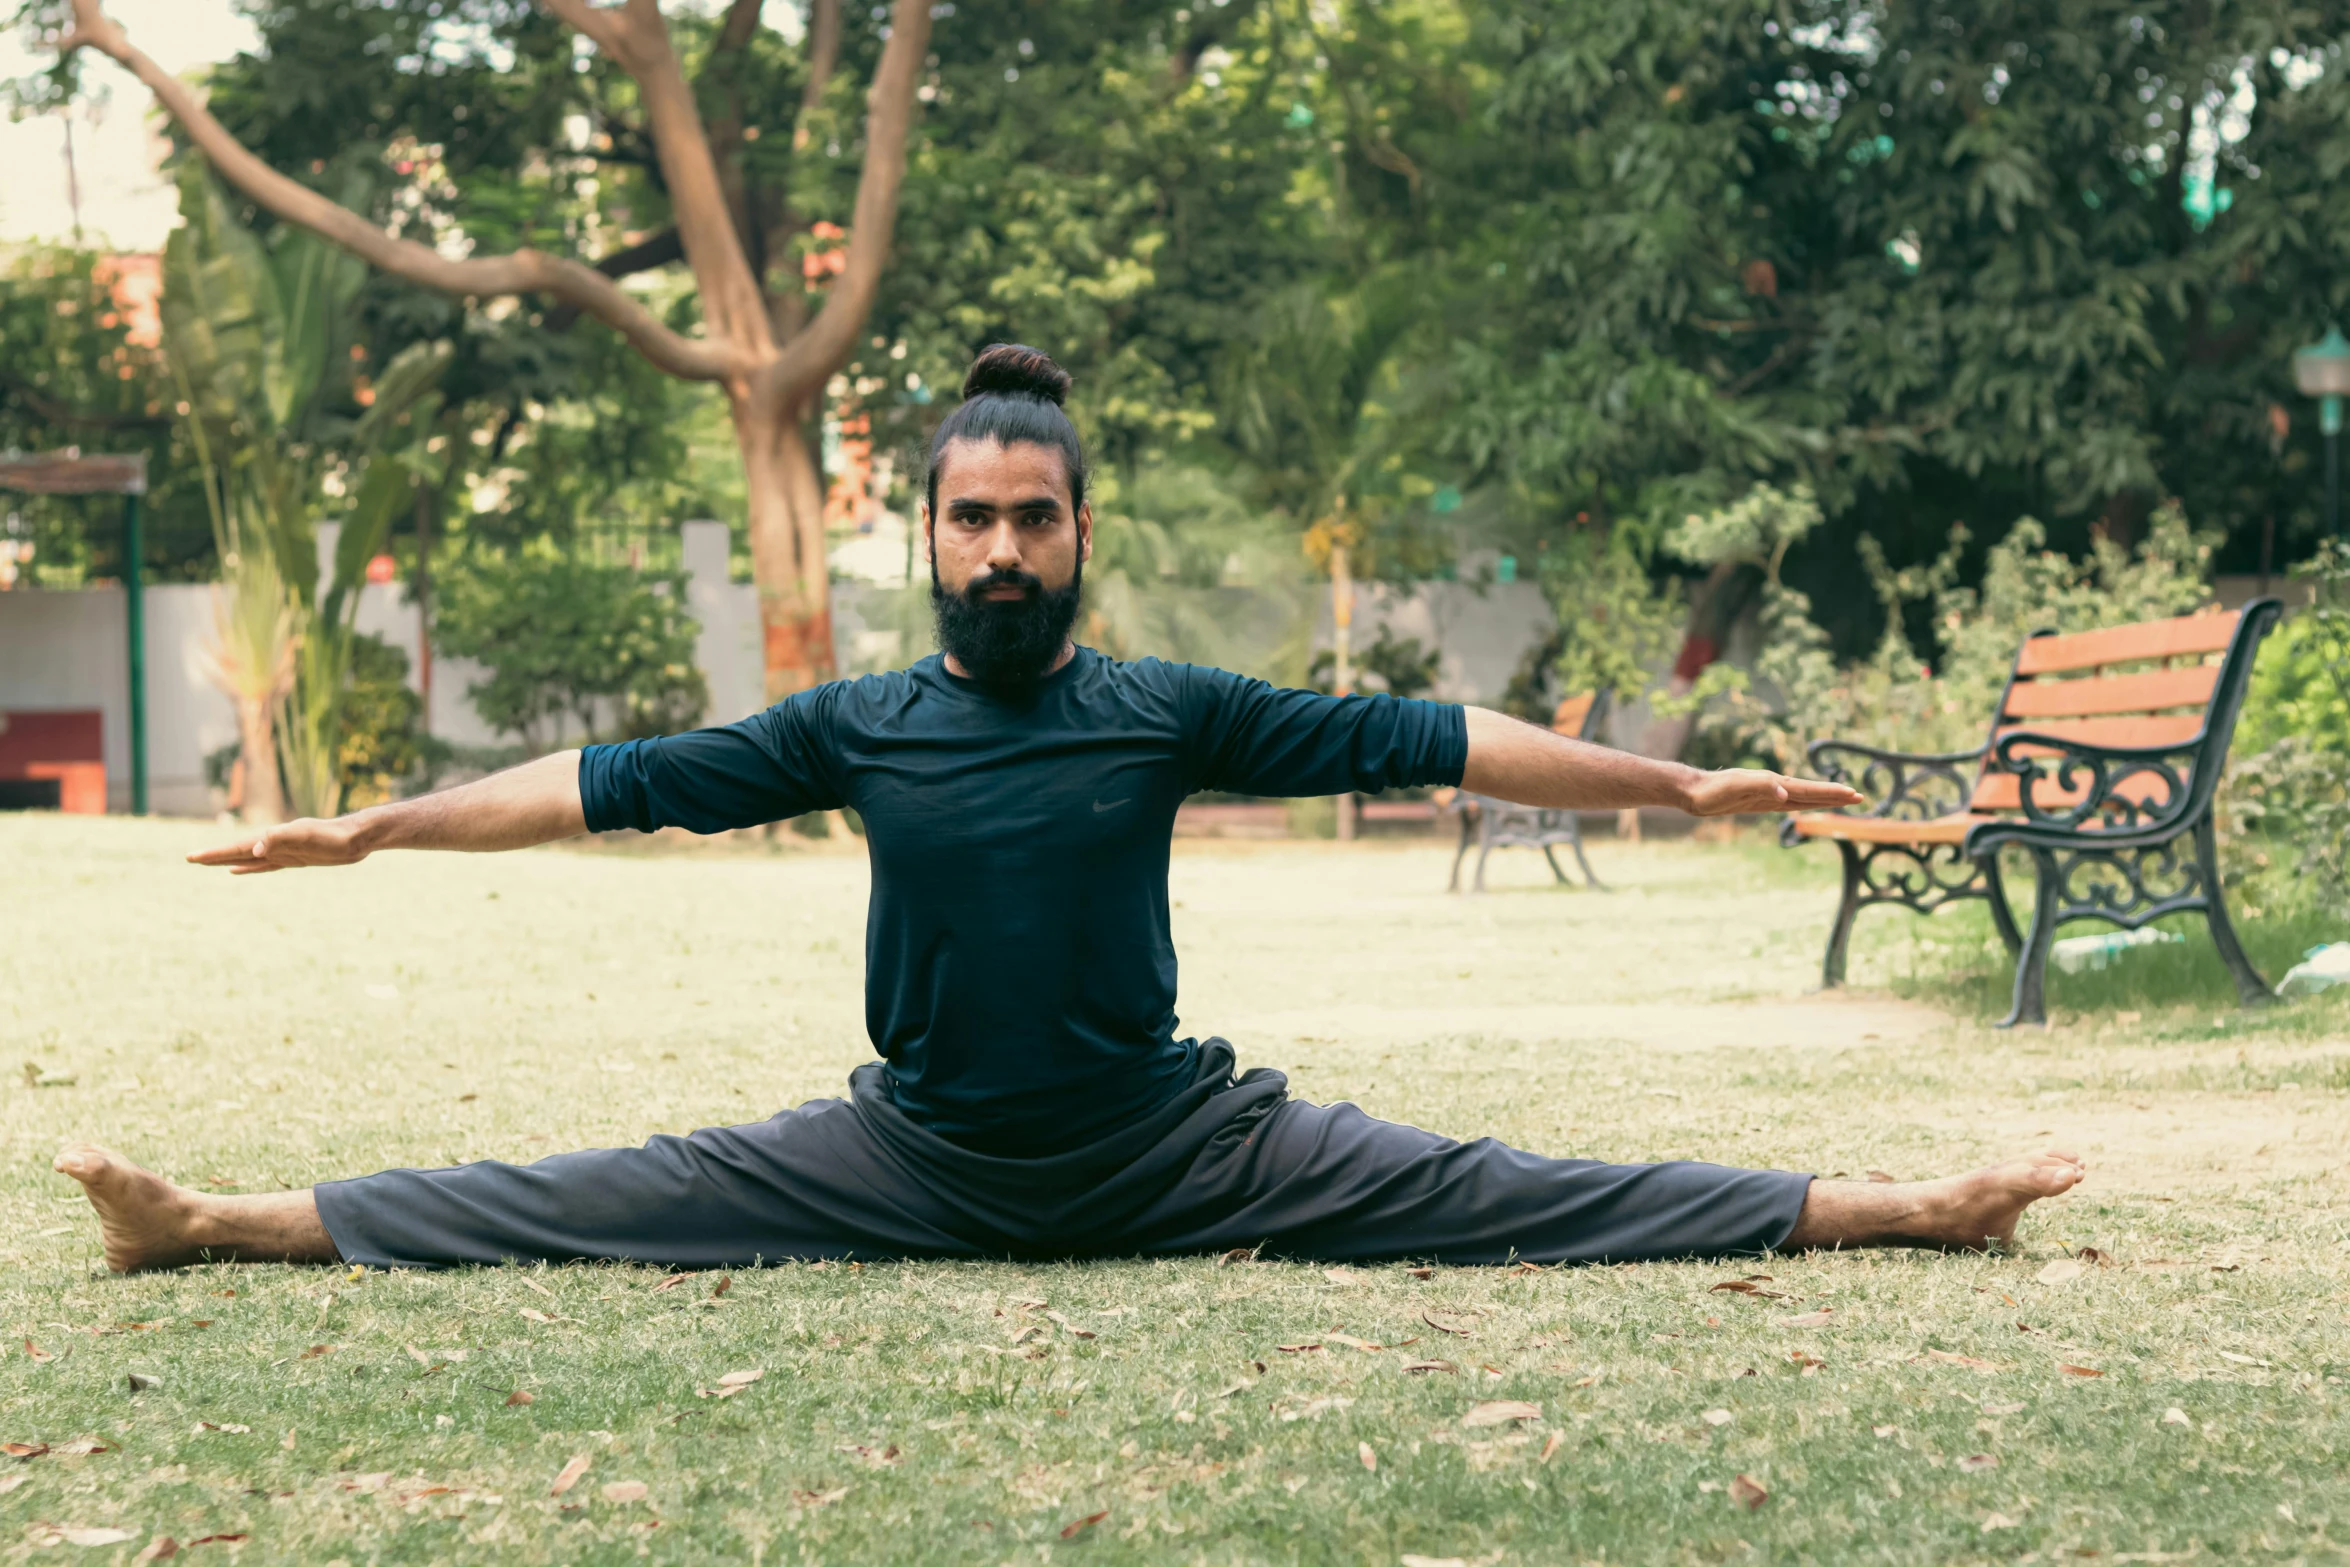 a man who is in the grass doing yoga exercises